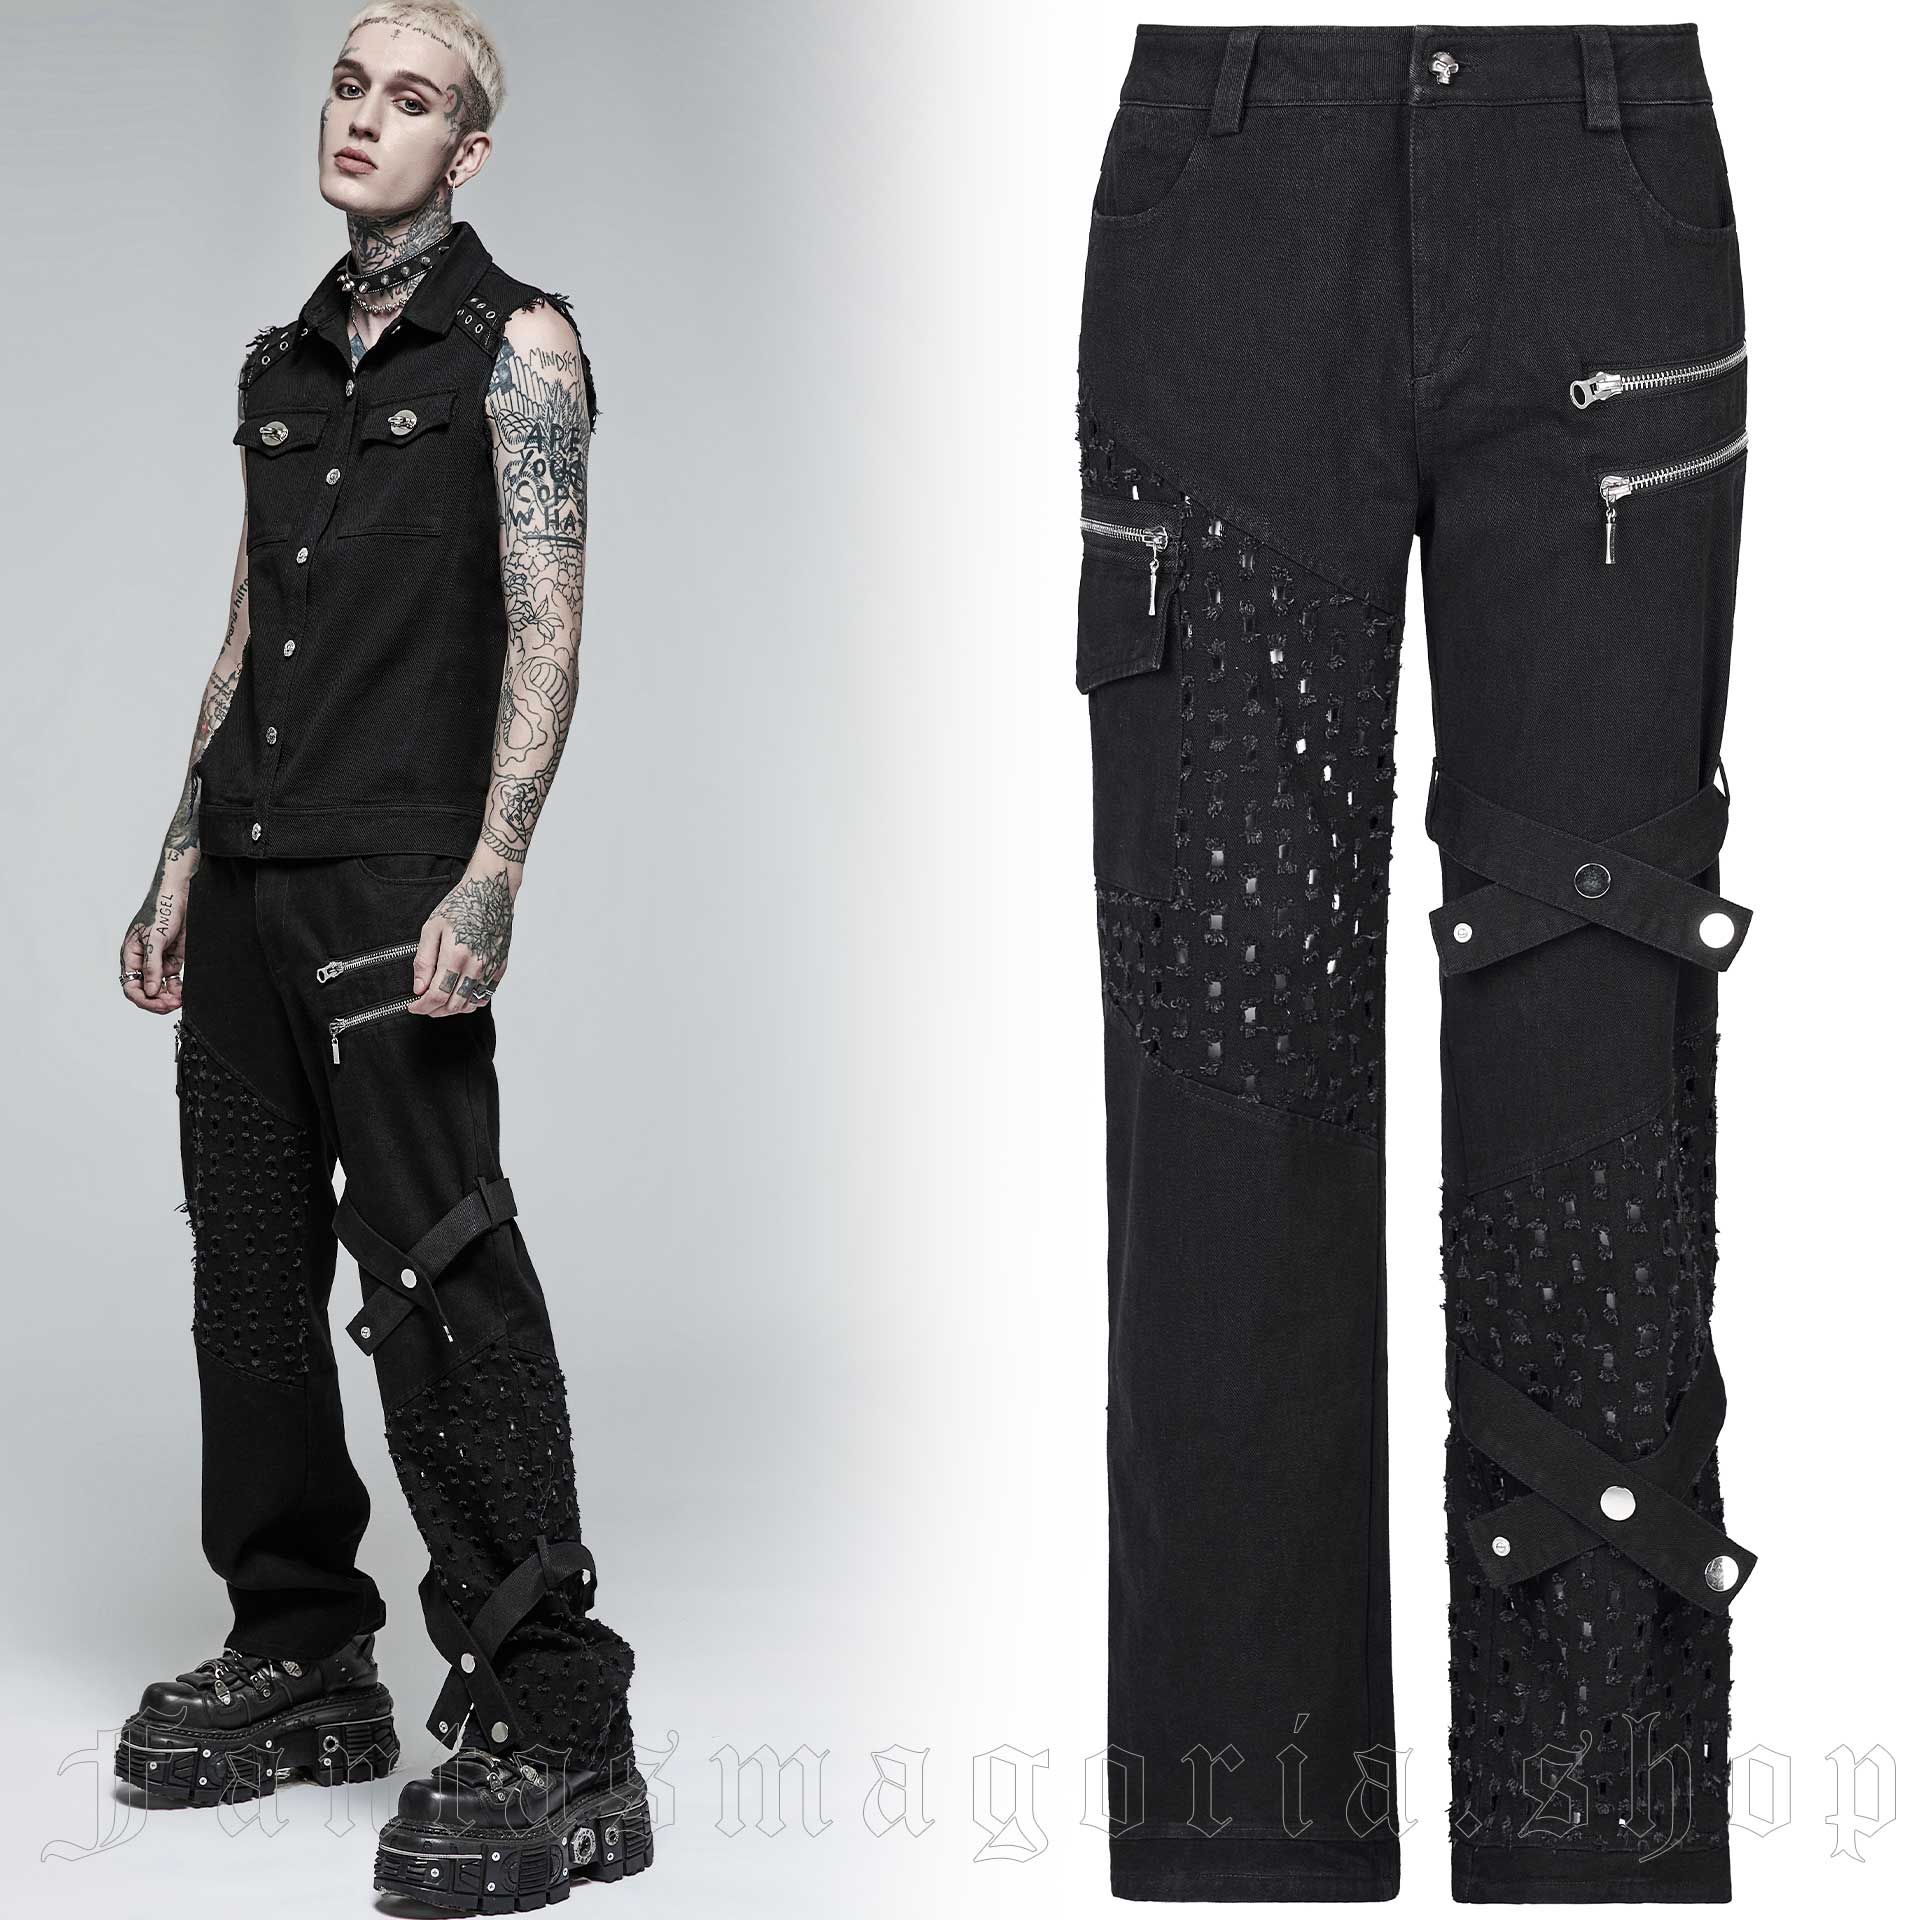 Atomic Abyss Trousers Punk Rave WK-494 1